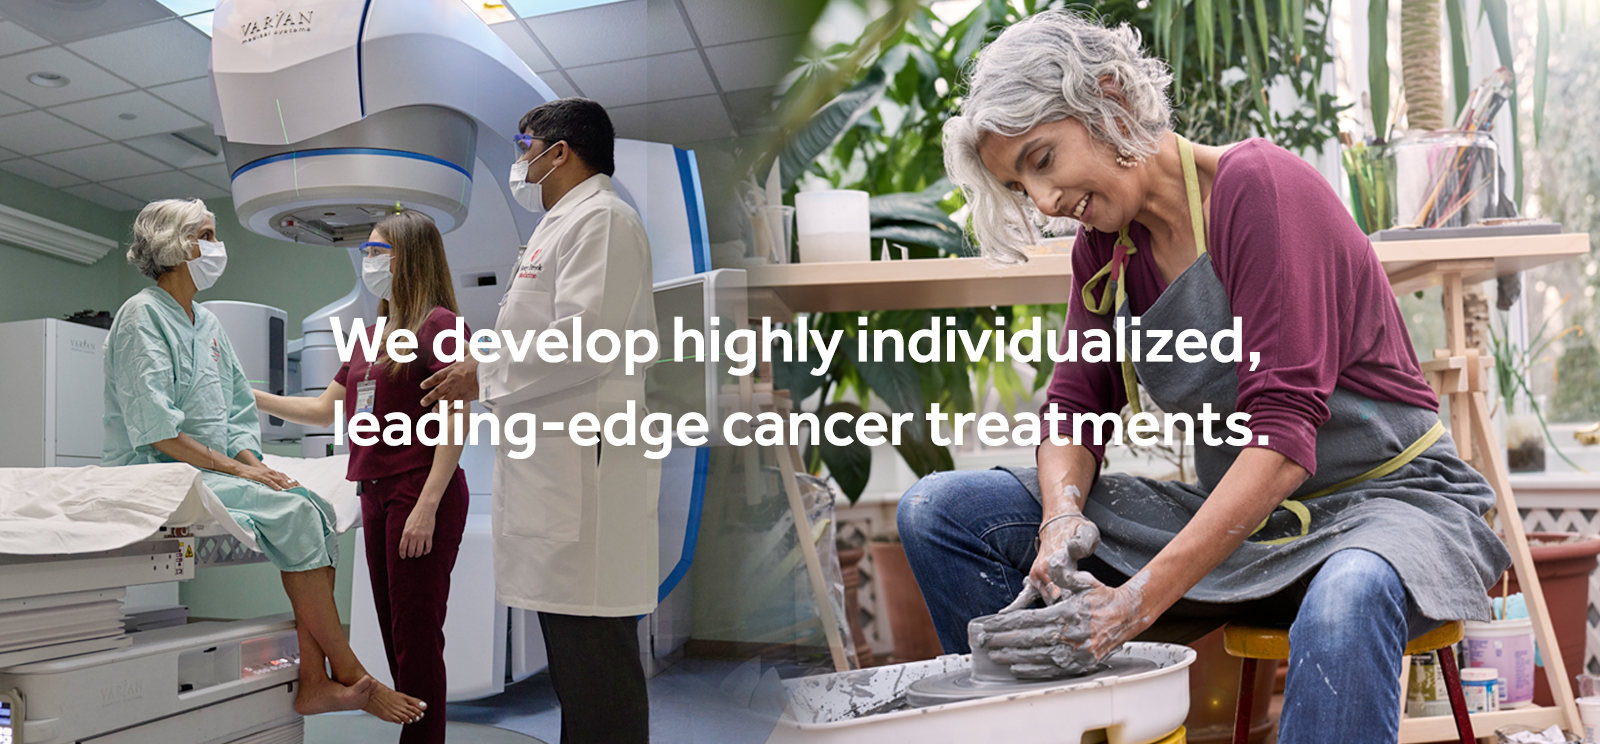 We develop highly individualized, leading edge cancer treatments